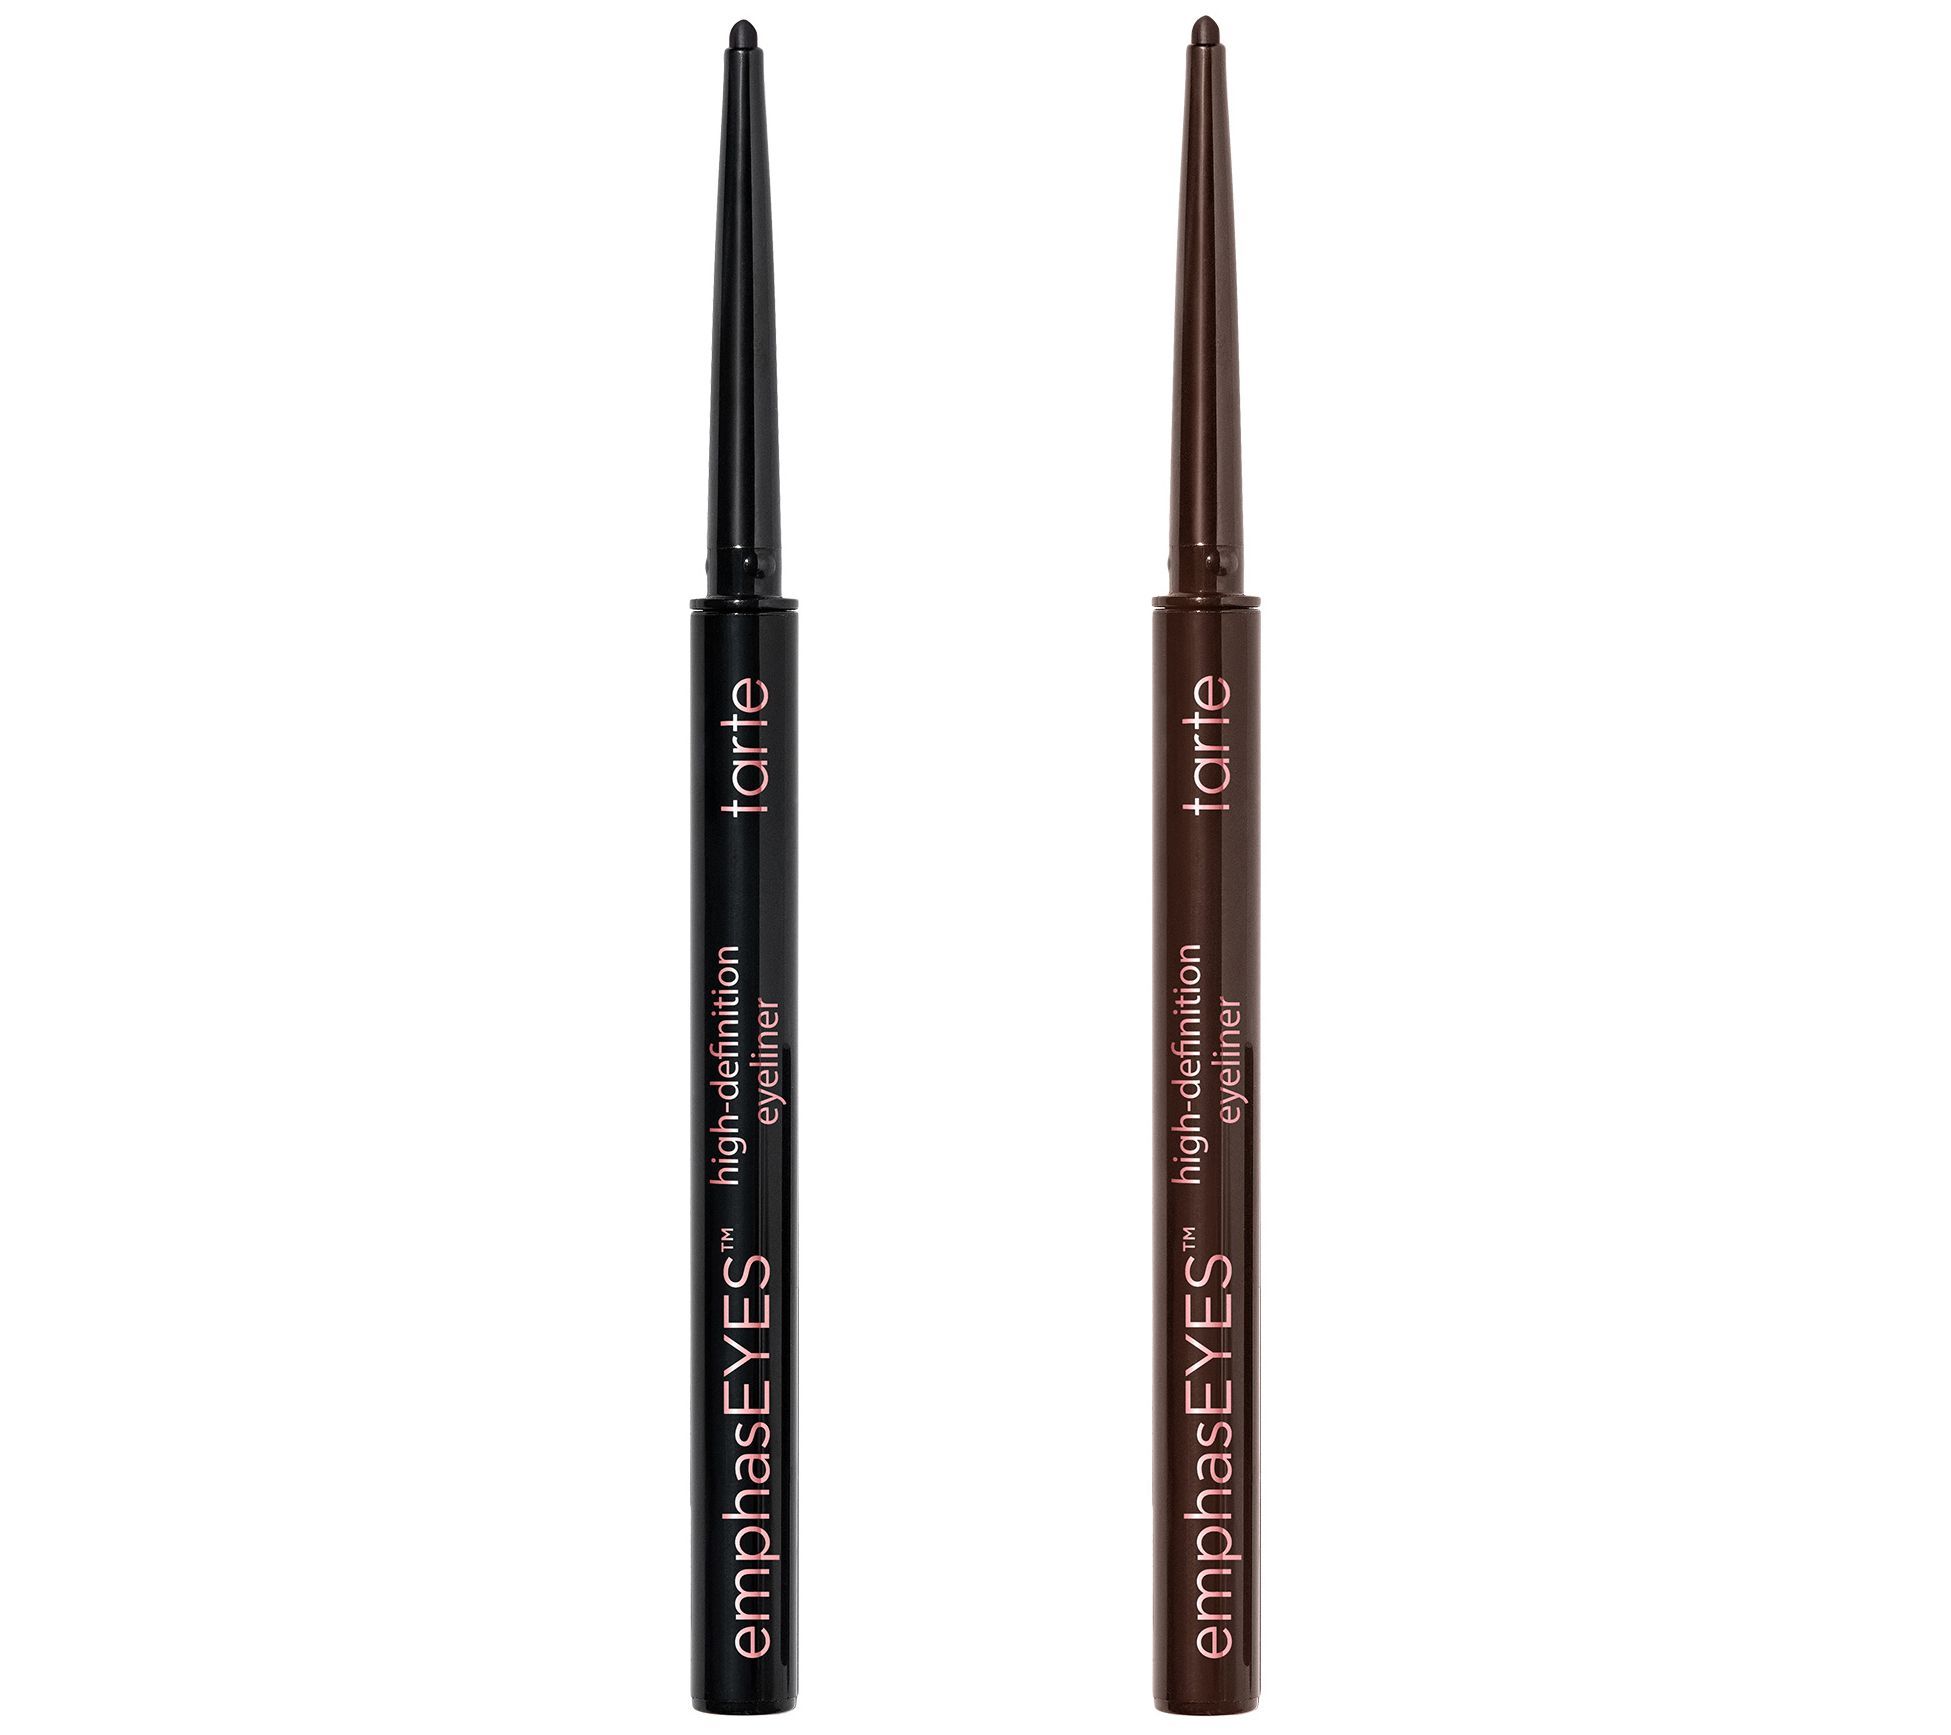 tarte emphasEYES High-Definition Eyeliner Duo Duo | QVC